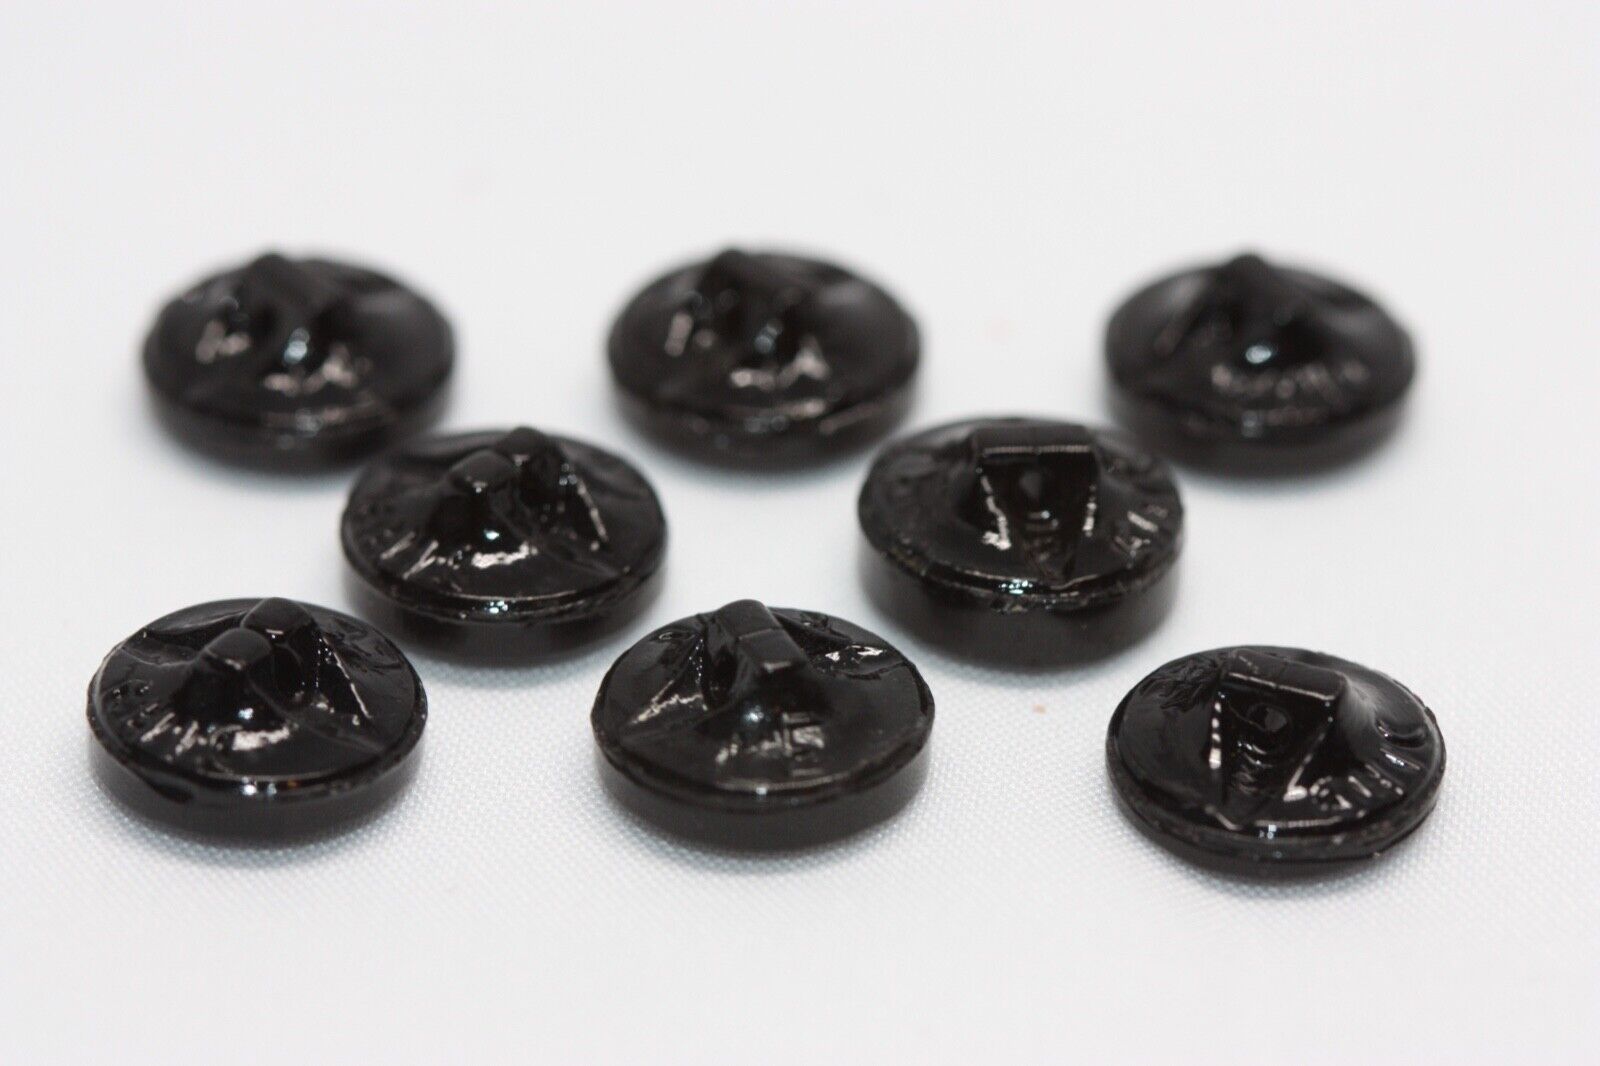 8 Vintage Le Chic Black Glass Honeycomb Buttons Round Faceted Jet Mourning Без бренда - фотография #9